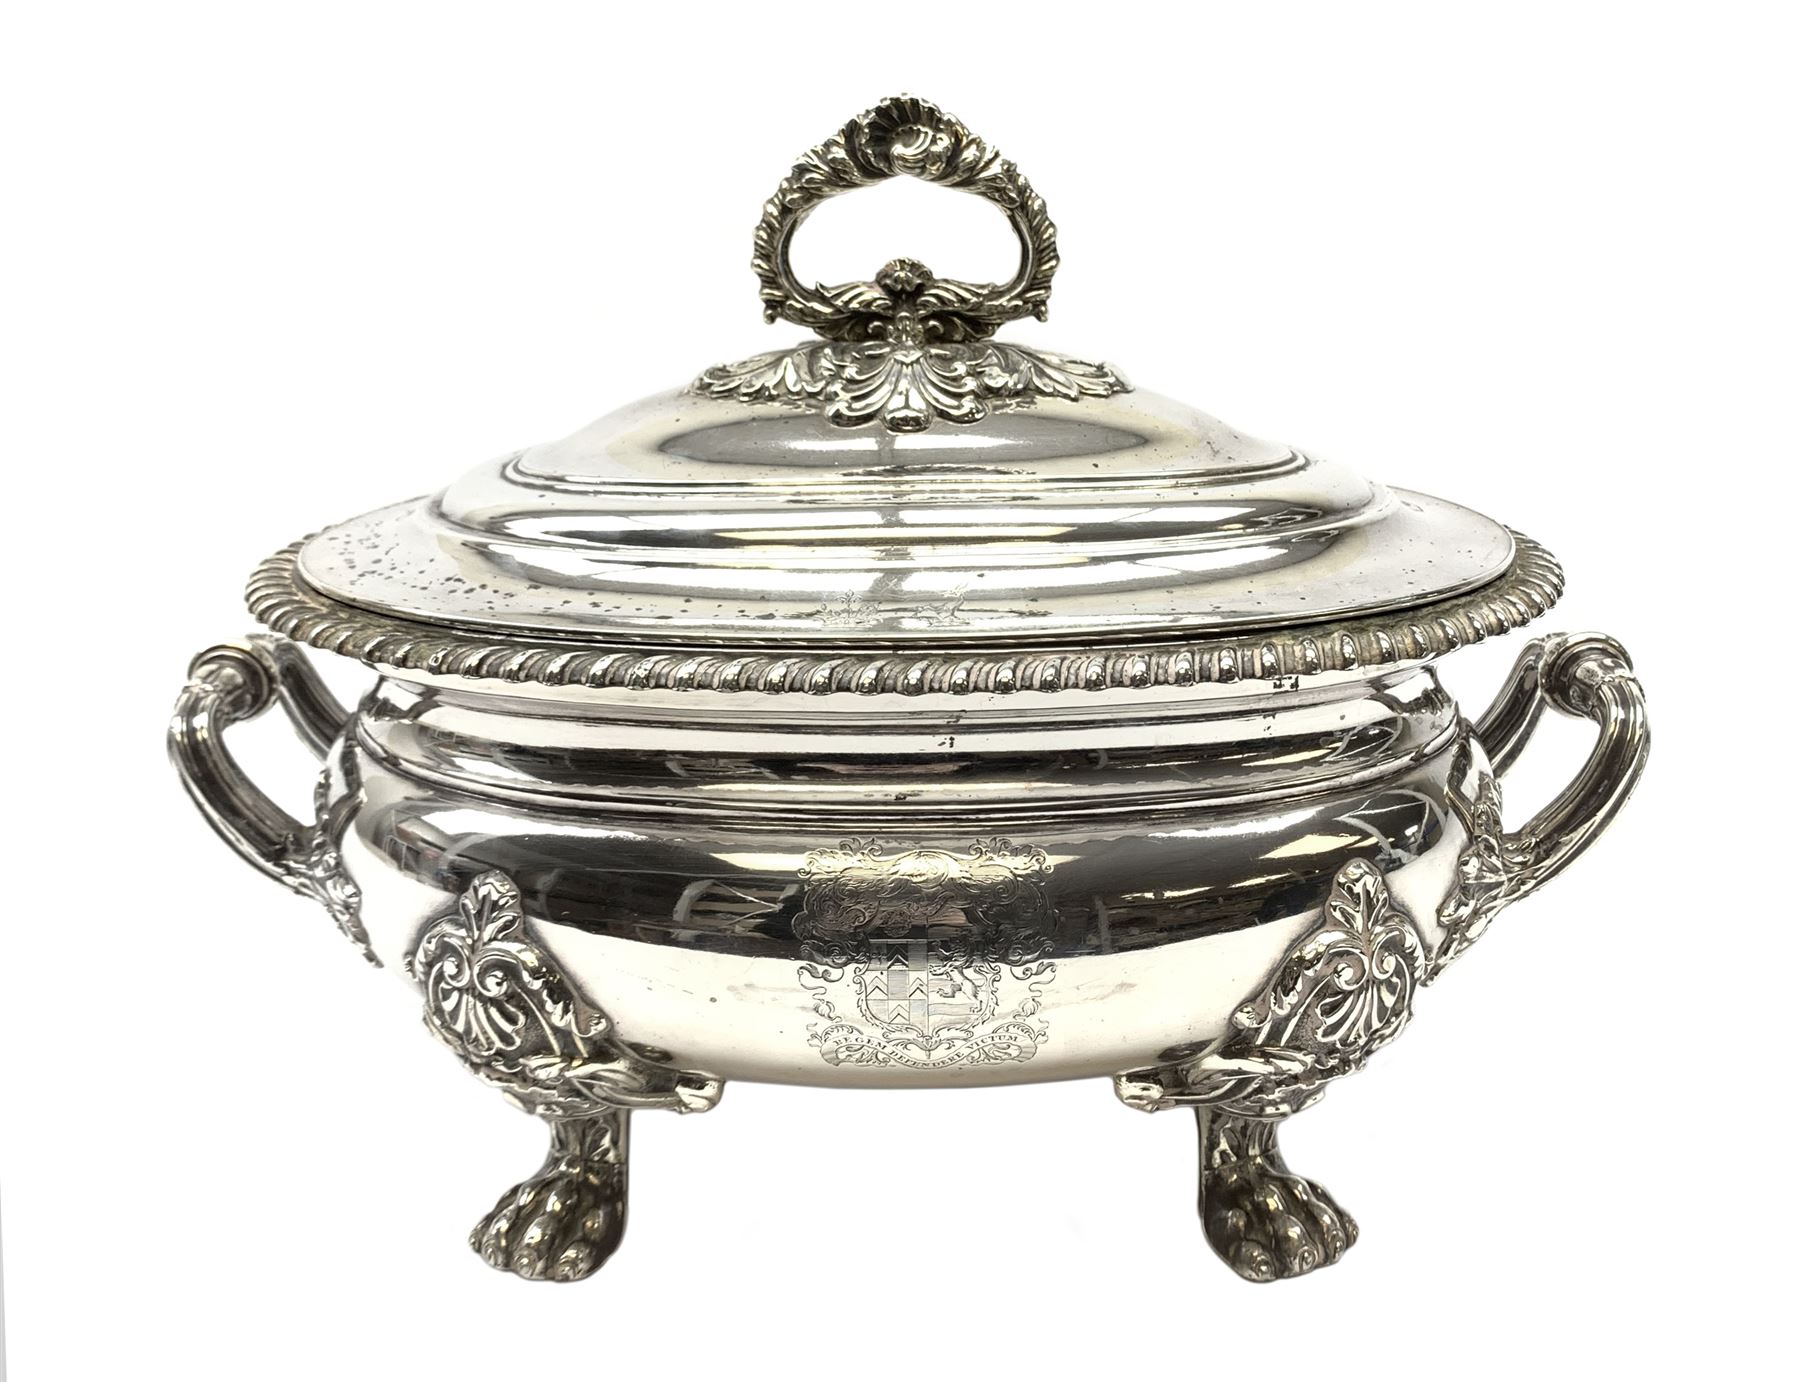 Matthew Boulton silver plated tureen and cover